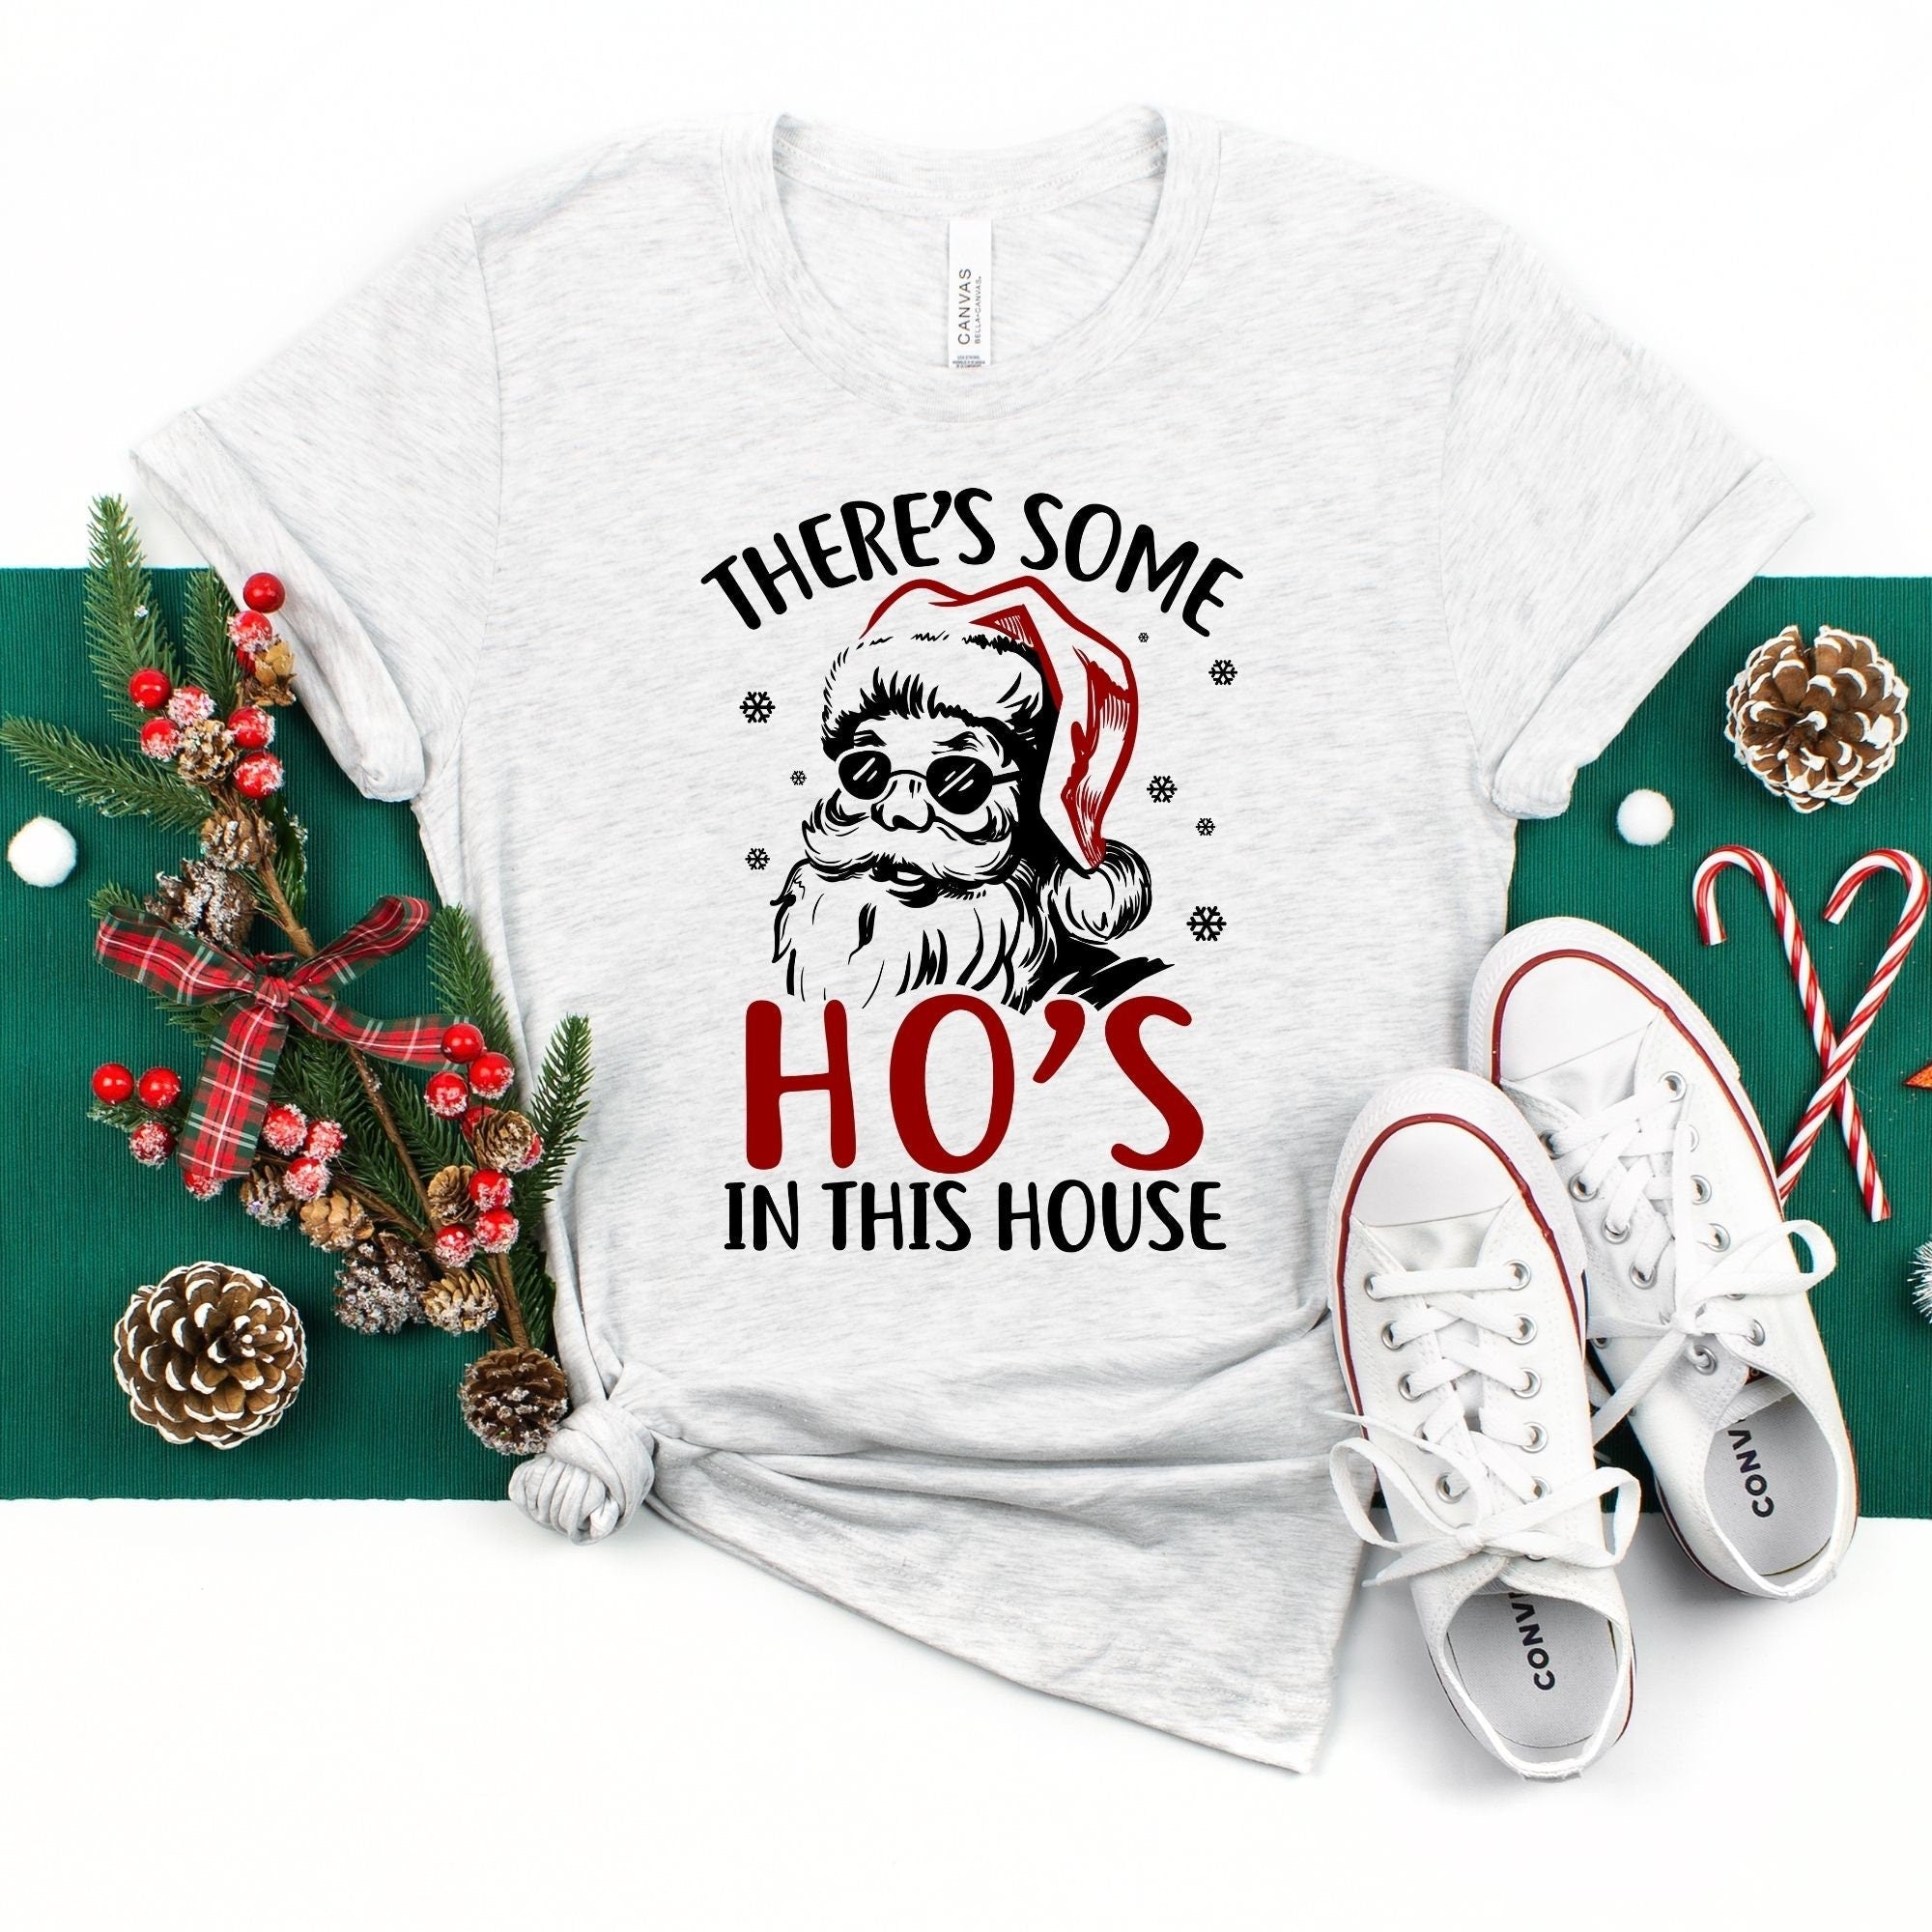 Hoes in the House Holiday TShirt, Funny Christmas Shirt *UNISEX FIT*-208 Tees Wholesale, Idaho